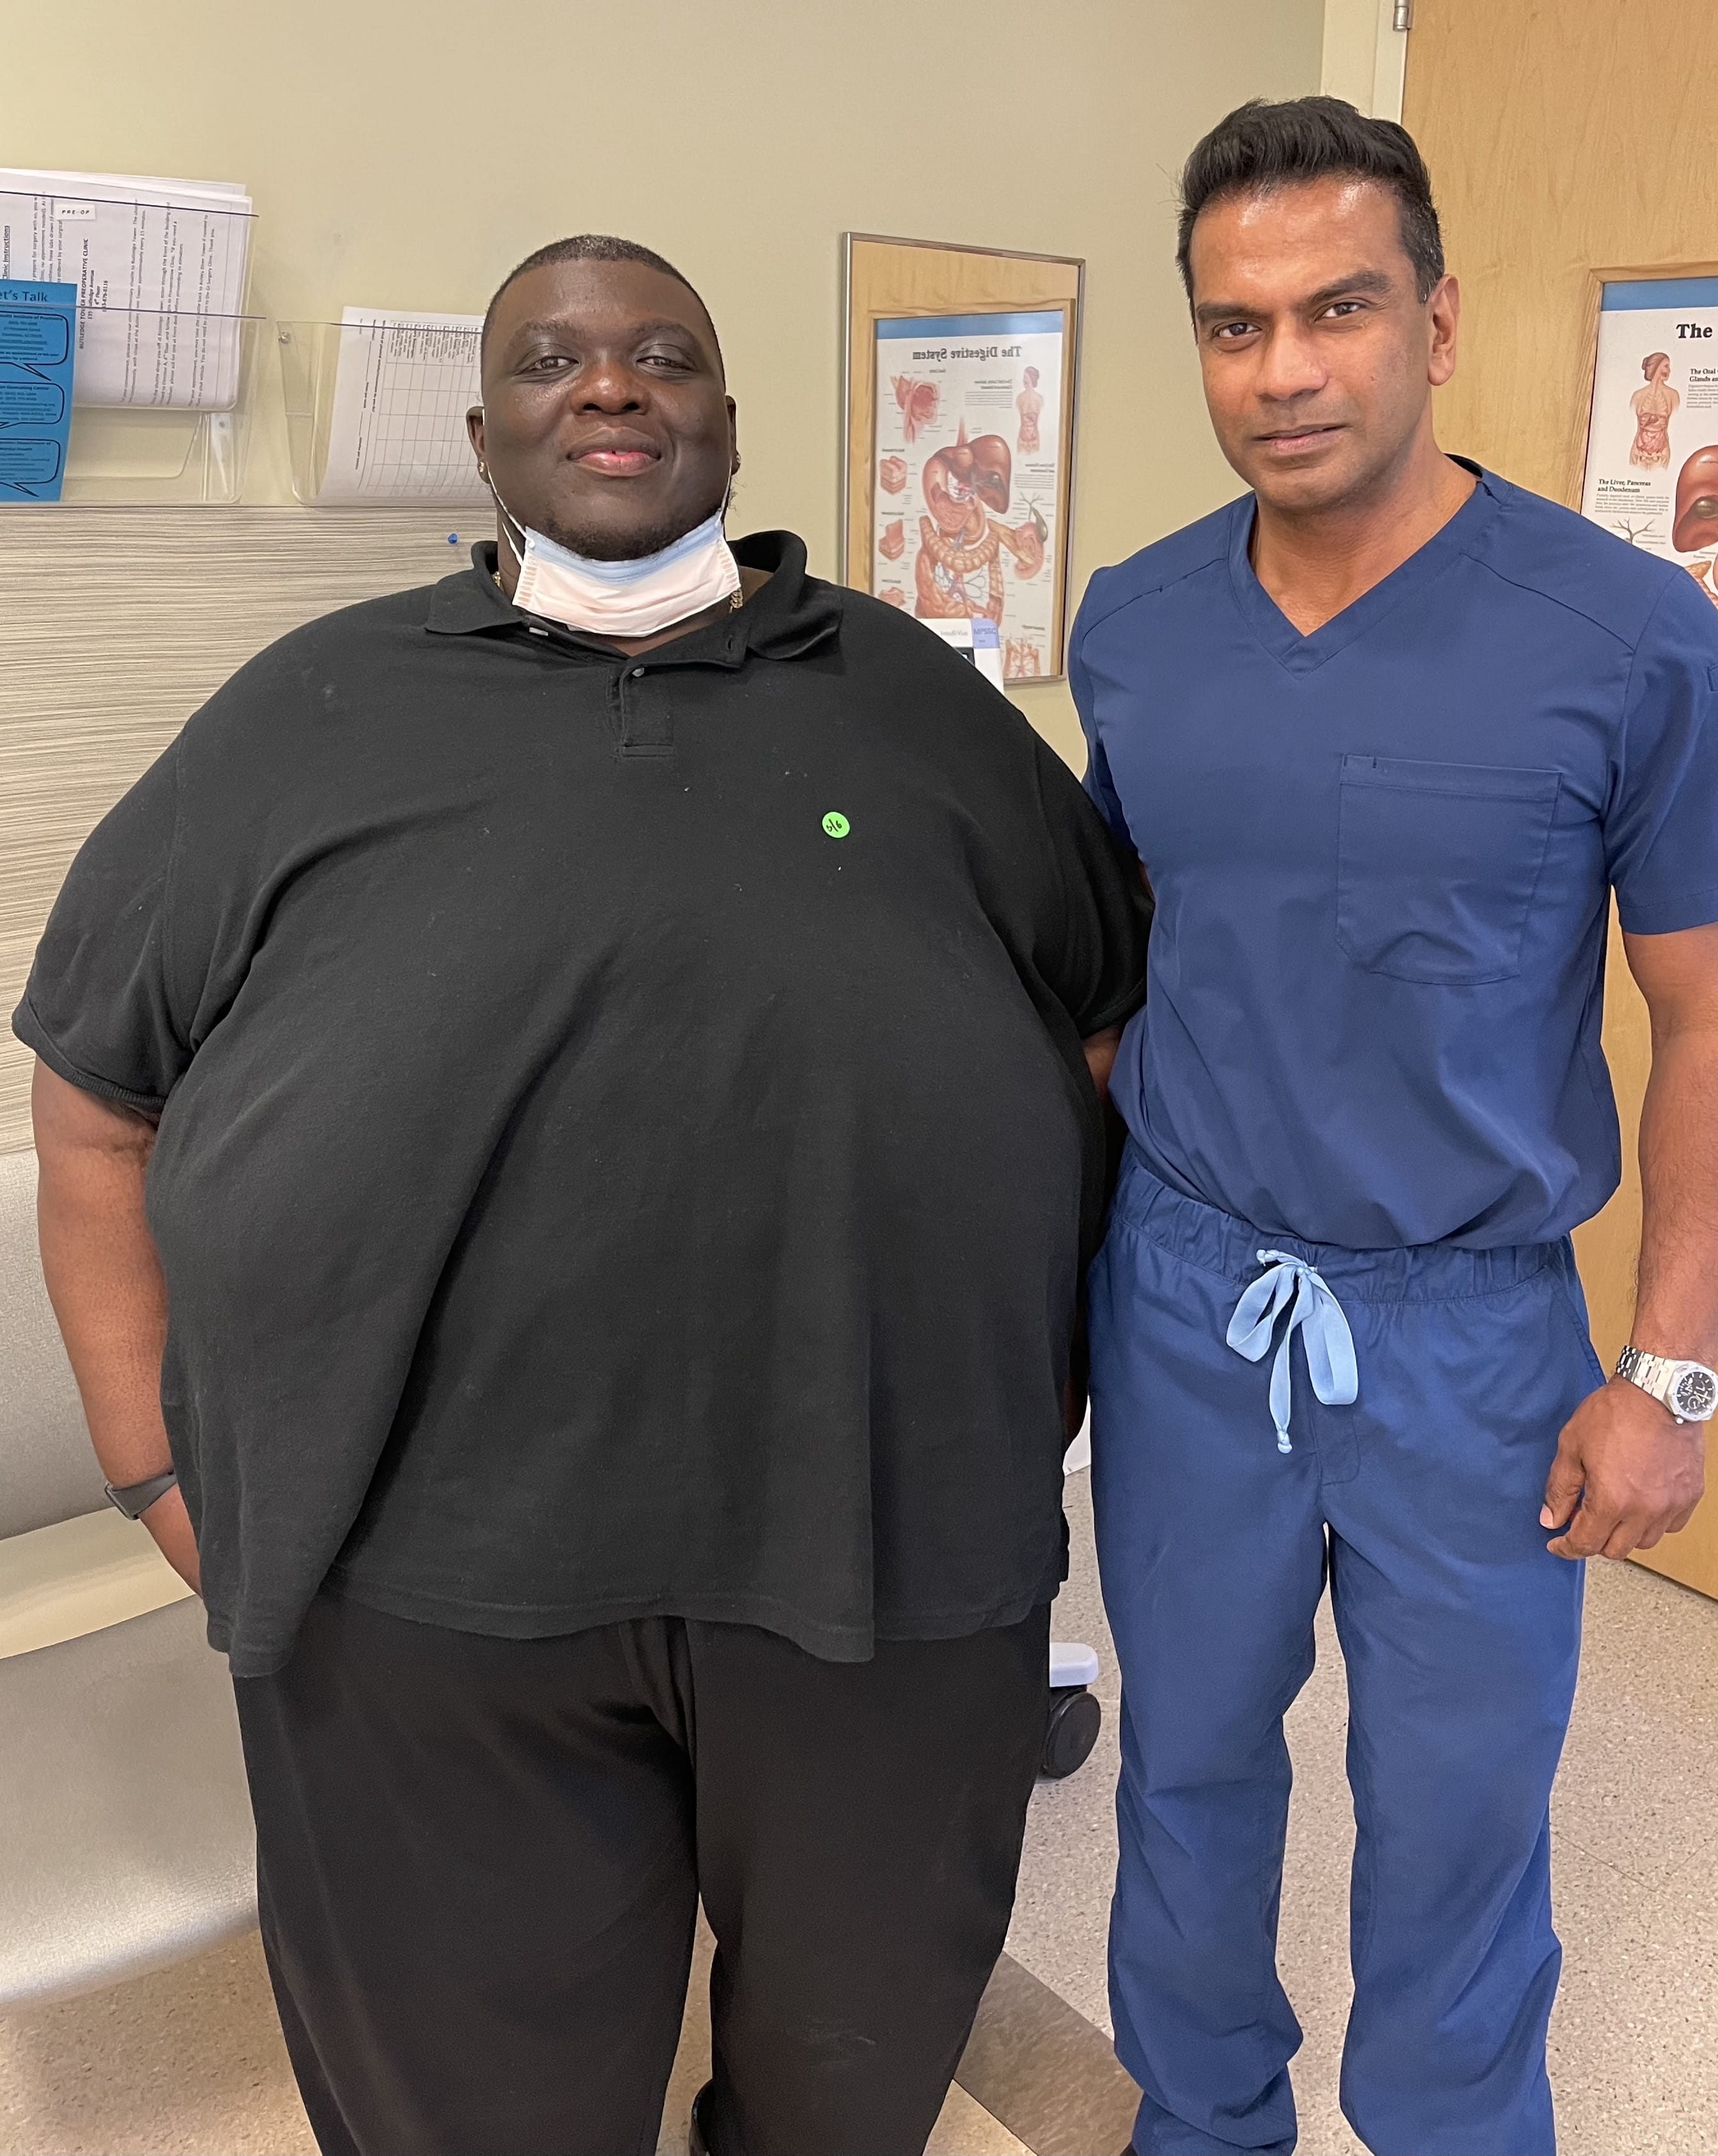 Patient standing with surgeon